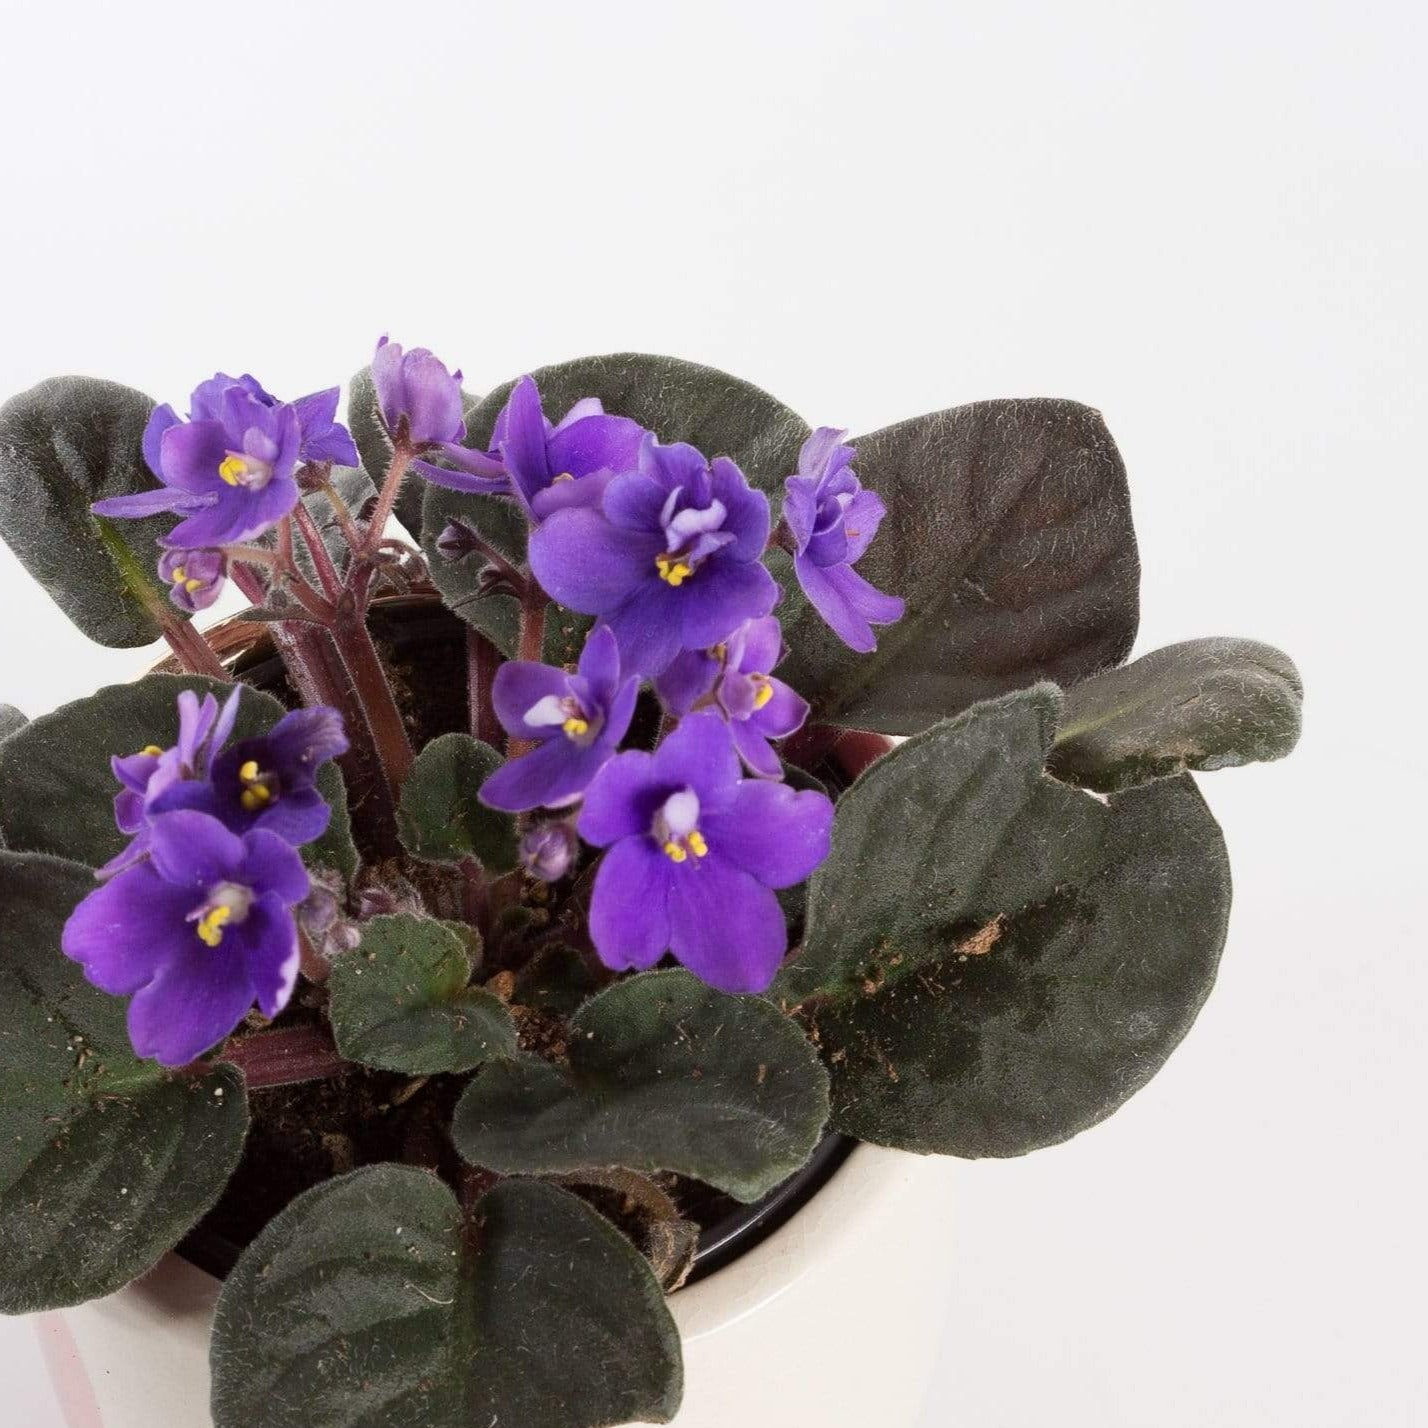 Urban Sprouts Plant 4" in nursery pot African Violet